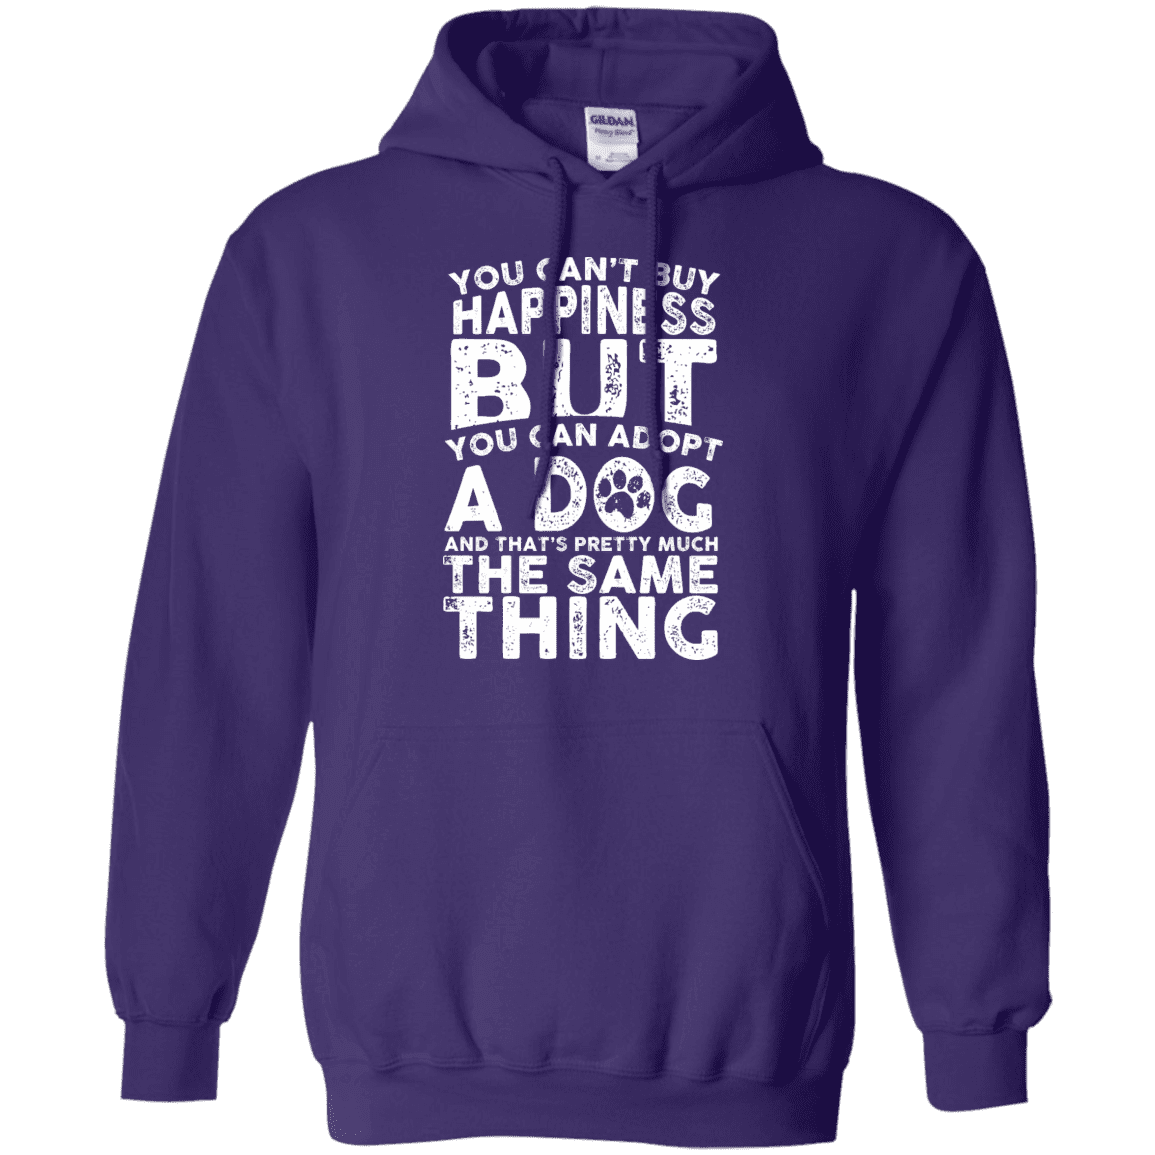 You Cant Buy Happiness - Hoodie.